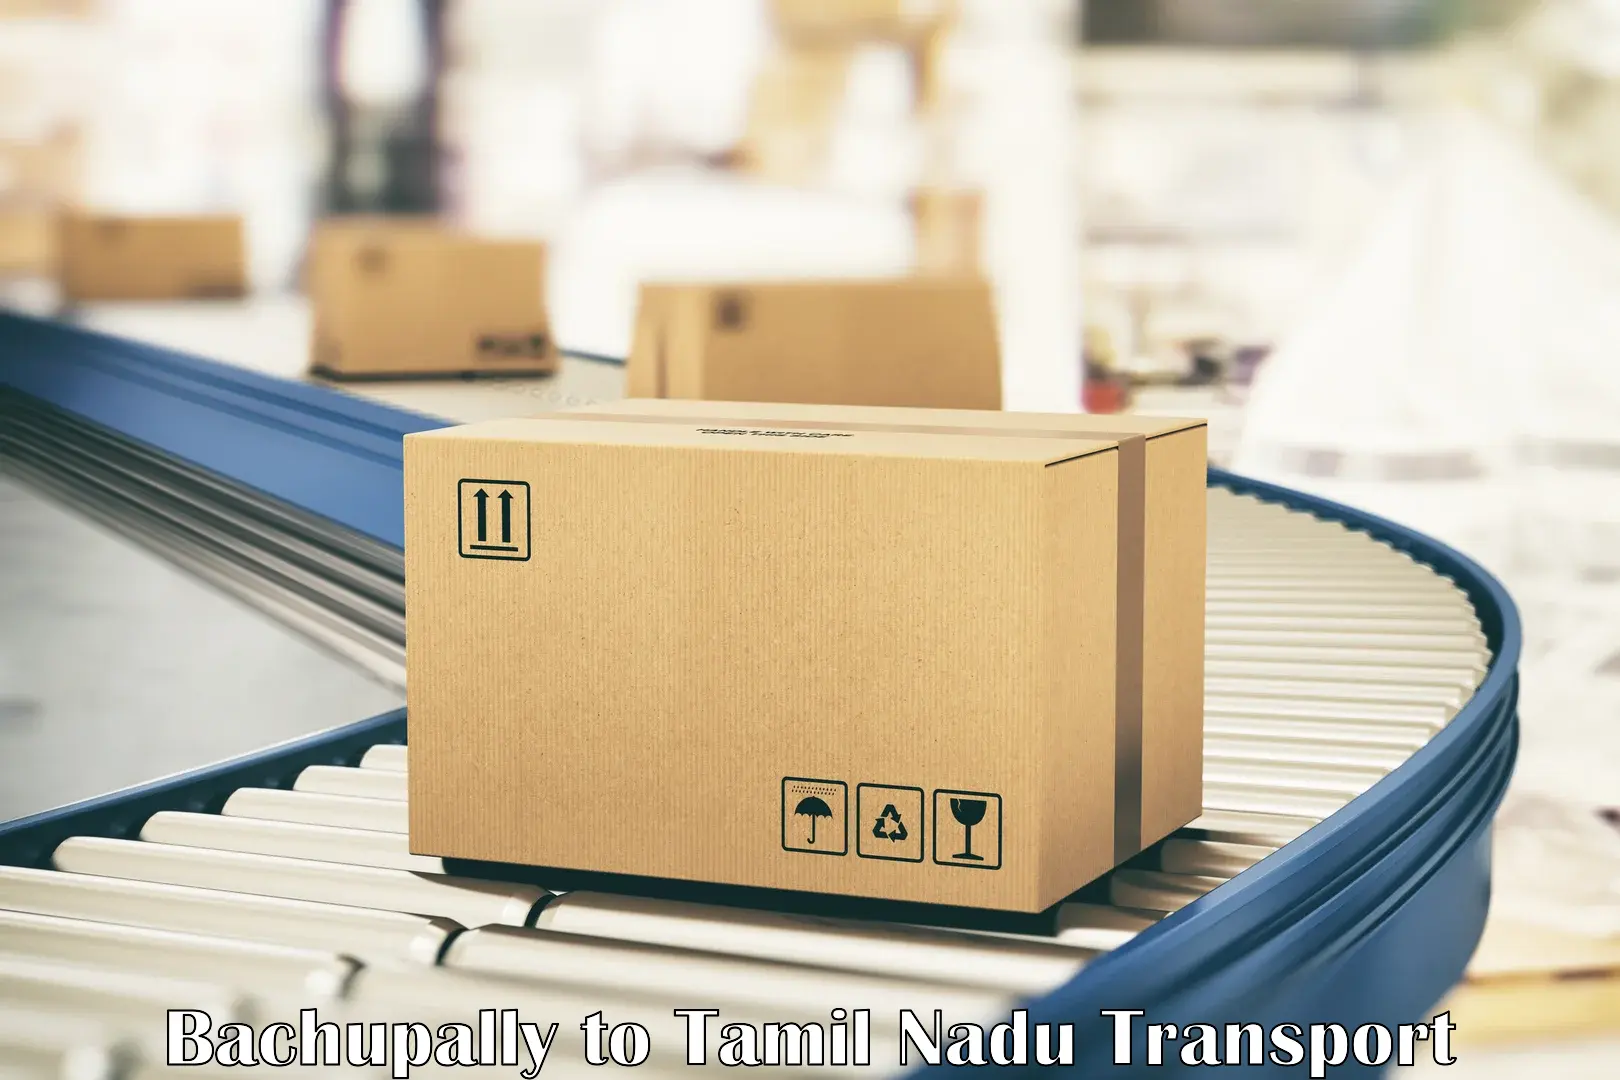 Road transport online services Bachupally to Eral